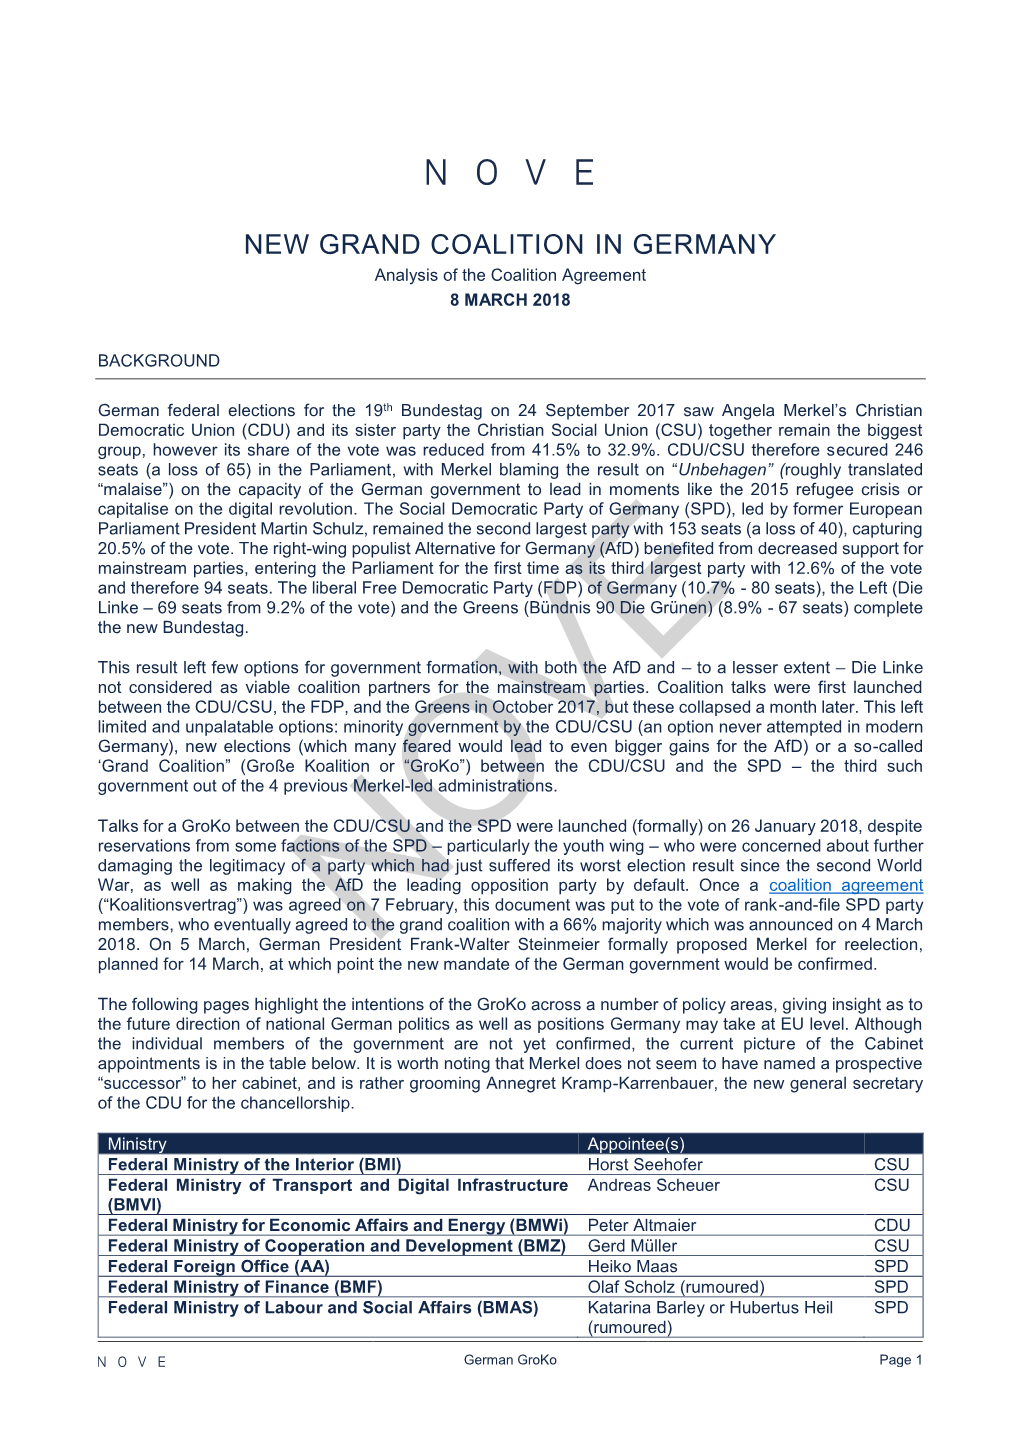 NEW GRAND COALITION in GERMANY Analysis of the Coalition Agreement 8 MARCH 2018